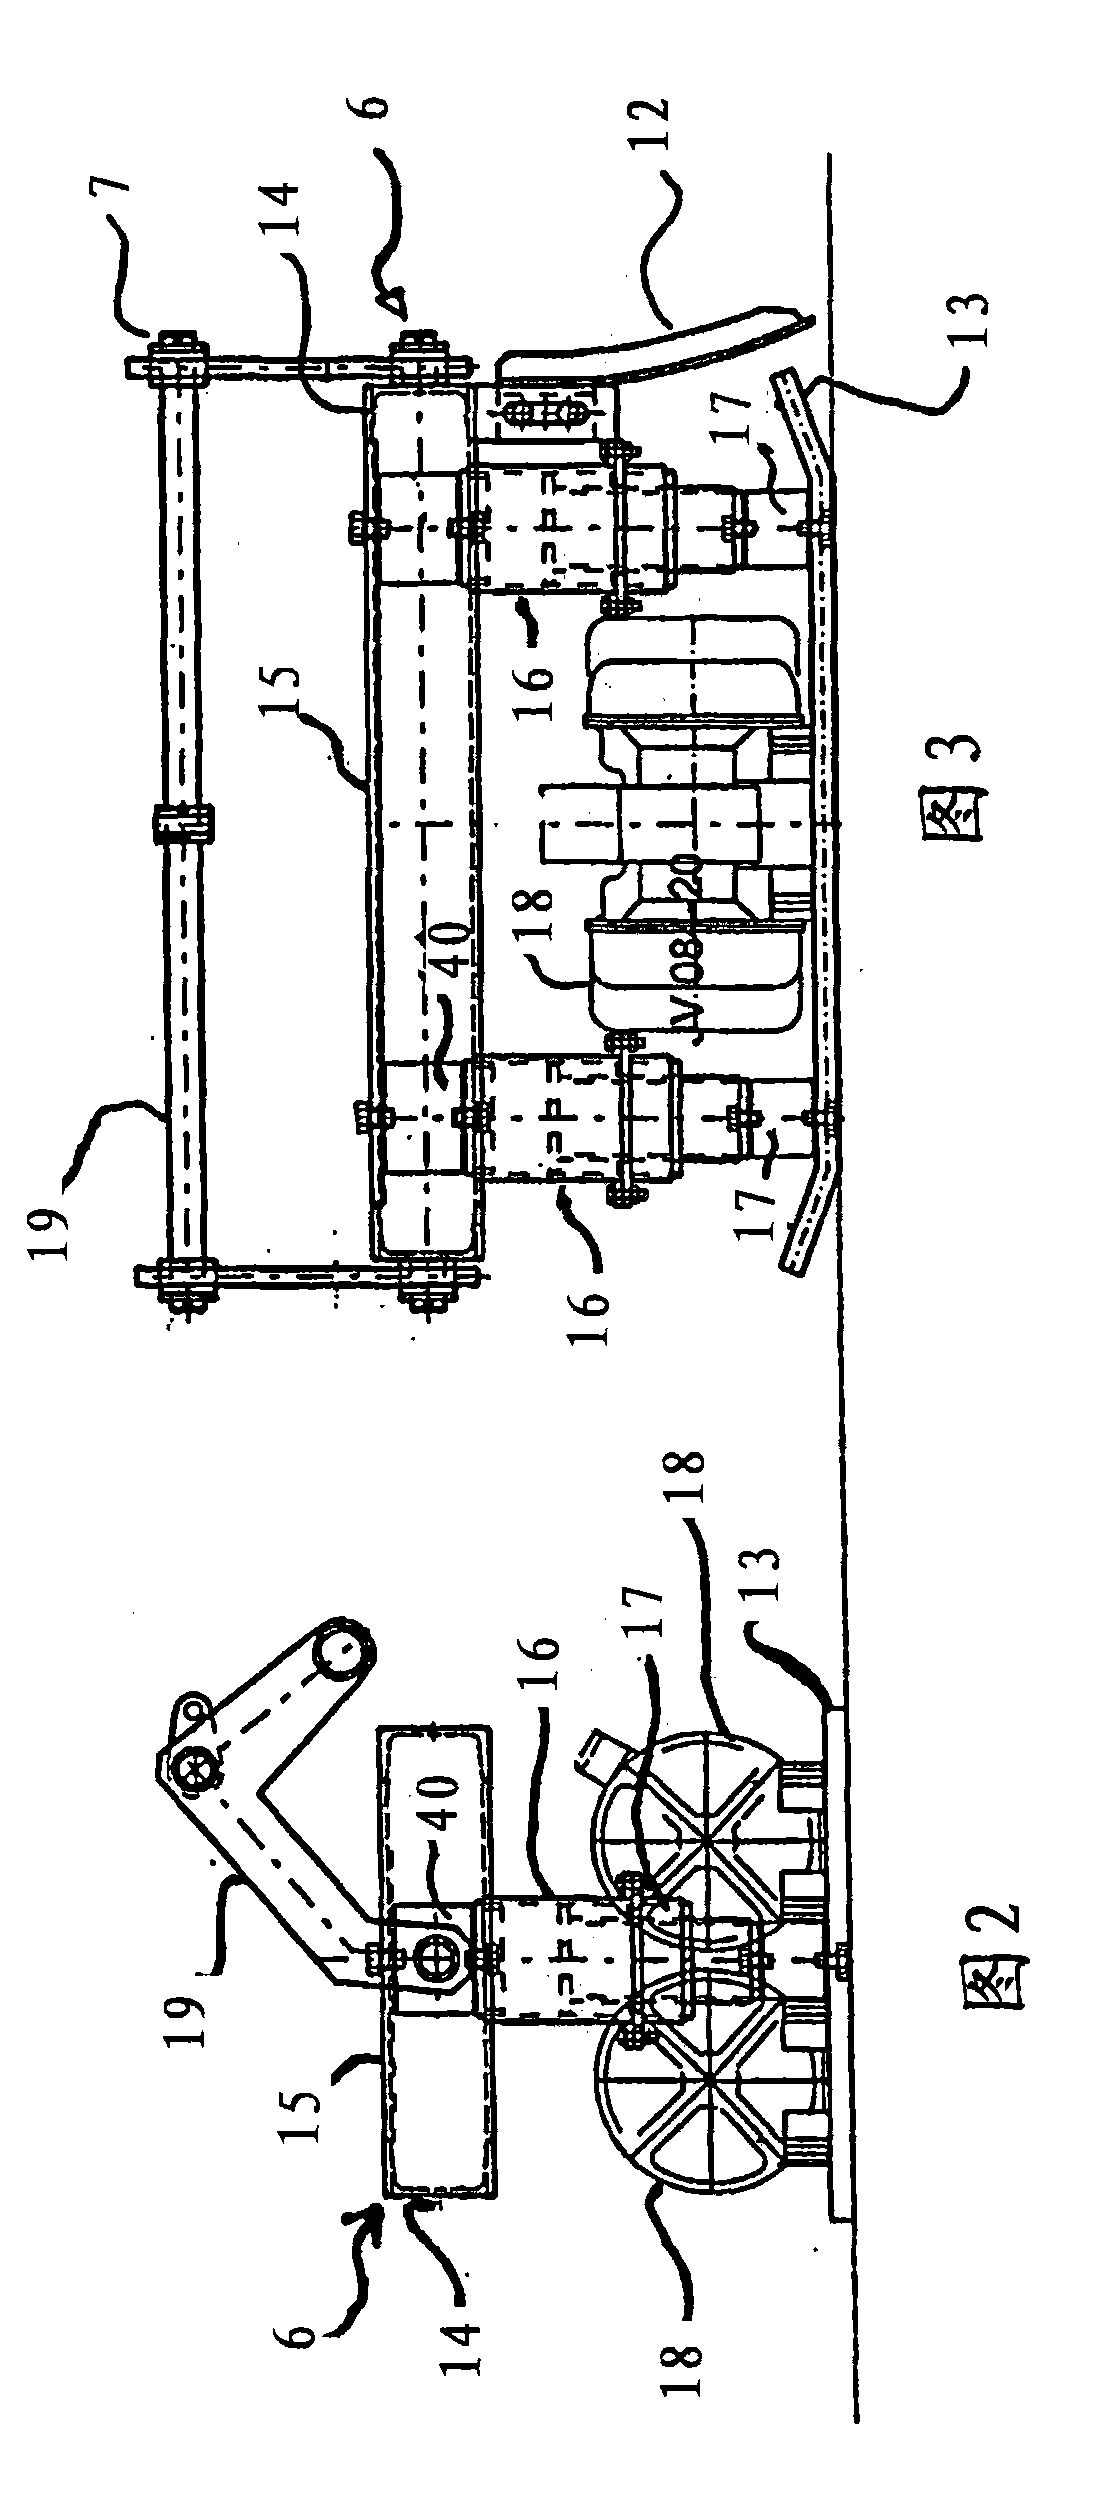 Method and device for removing loose material on wavy surfaces of stamped coal used for coking